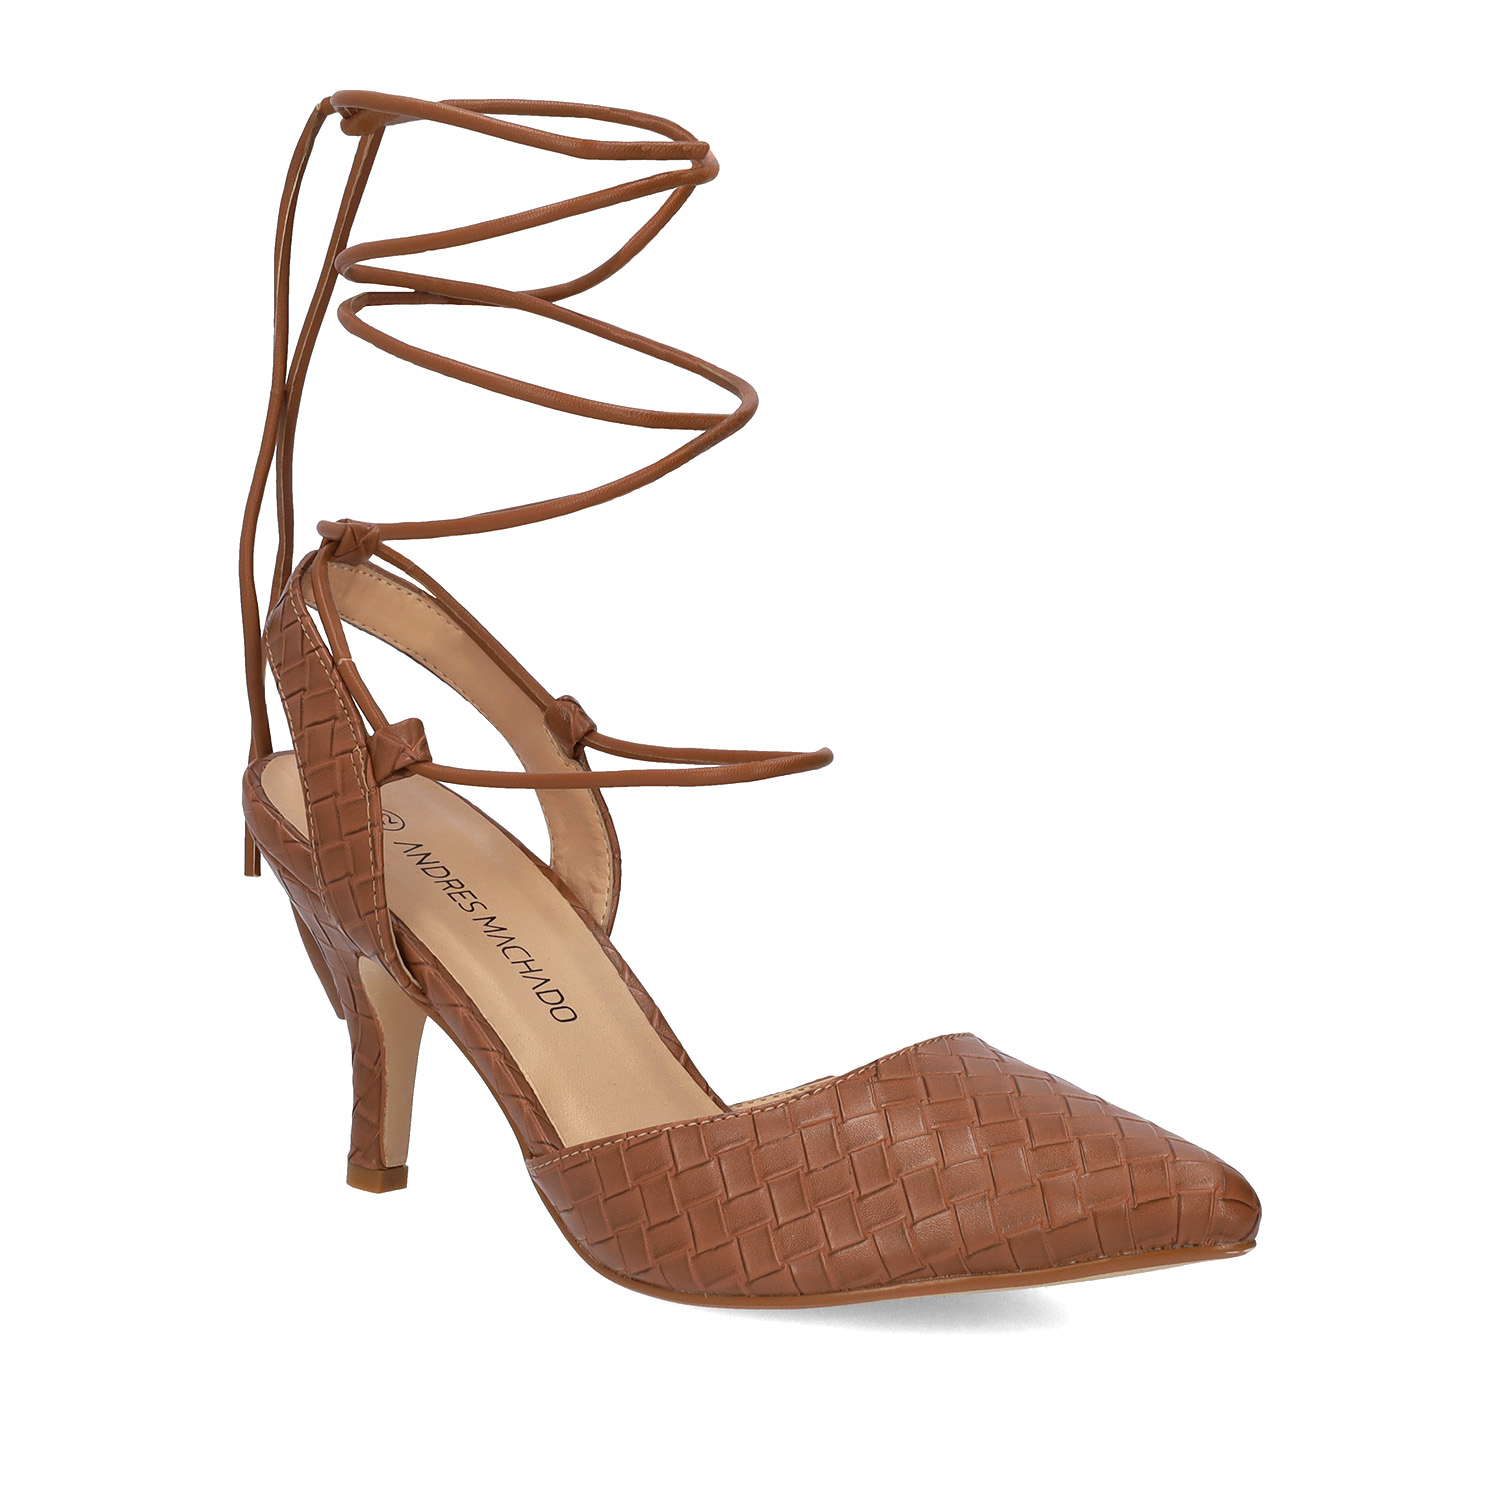 Woven brown faux leather heeled shoes 